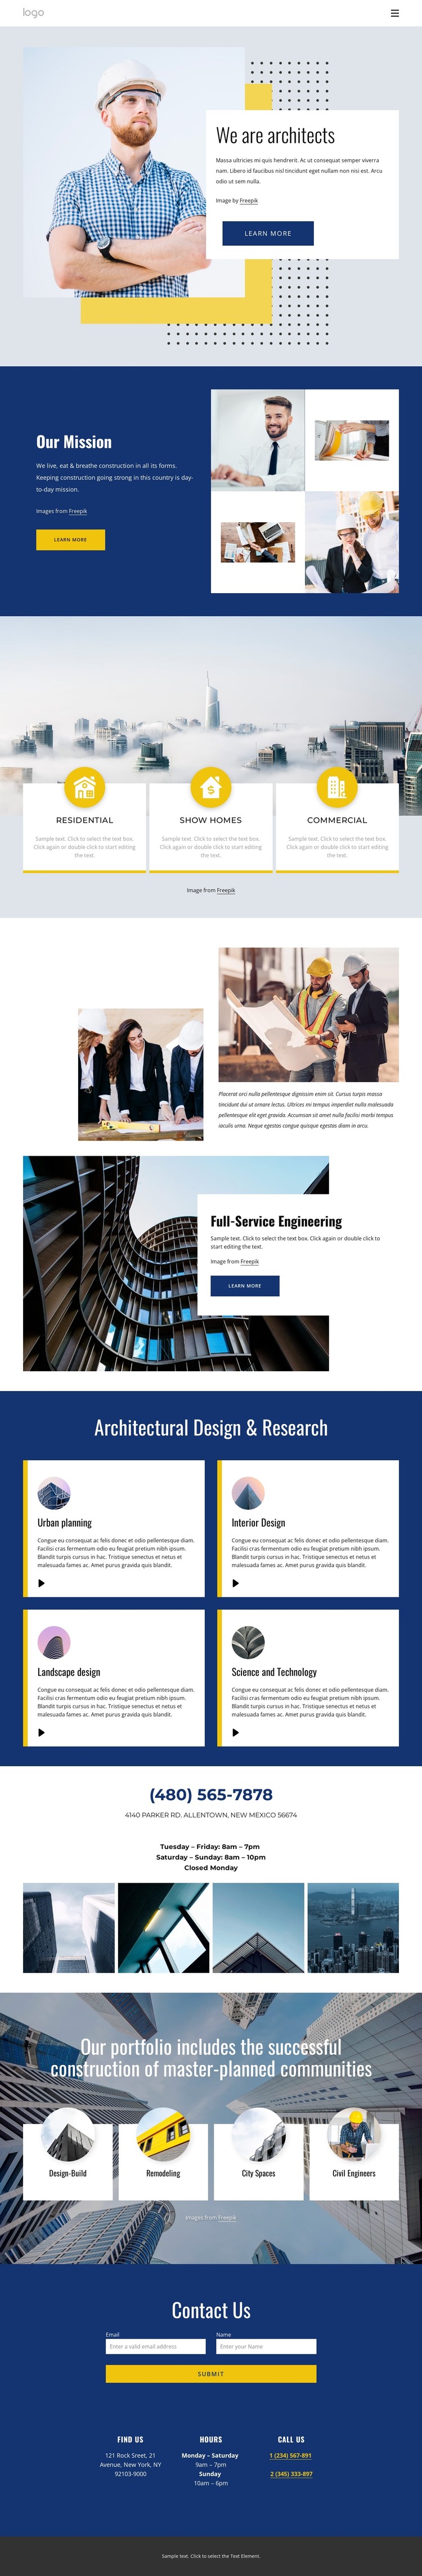 Architectural projects Web Design